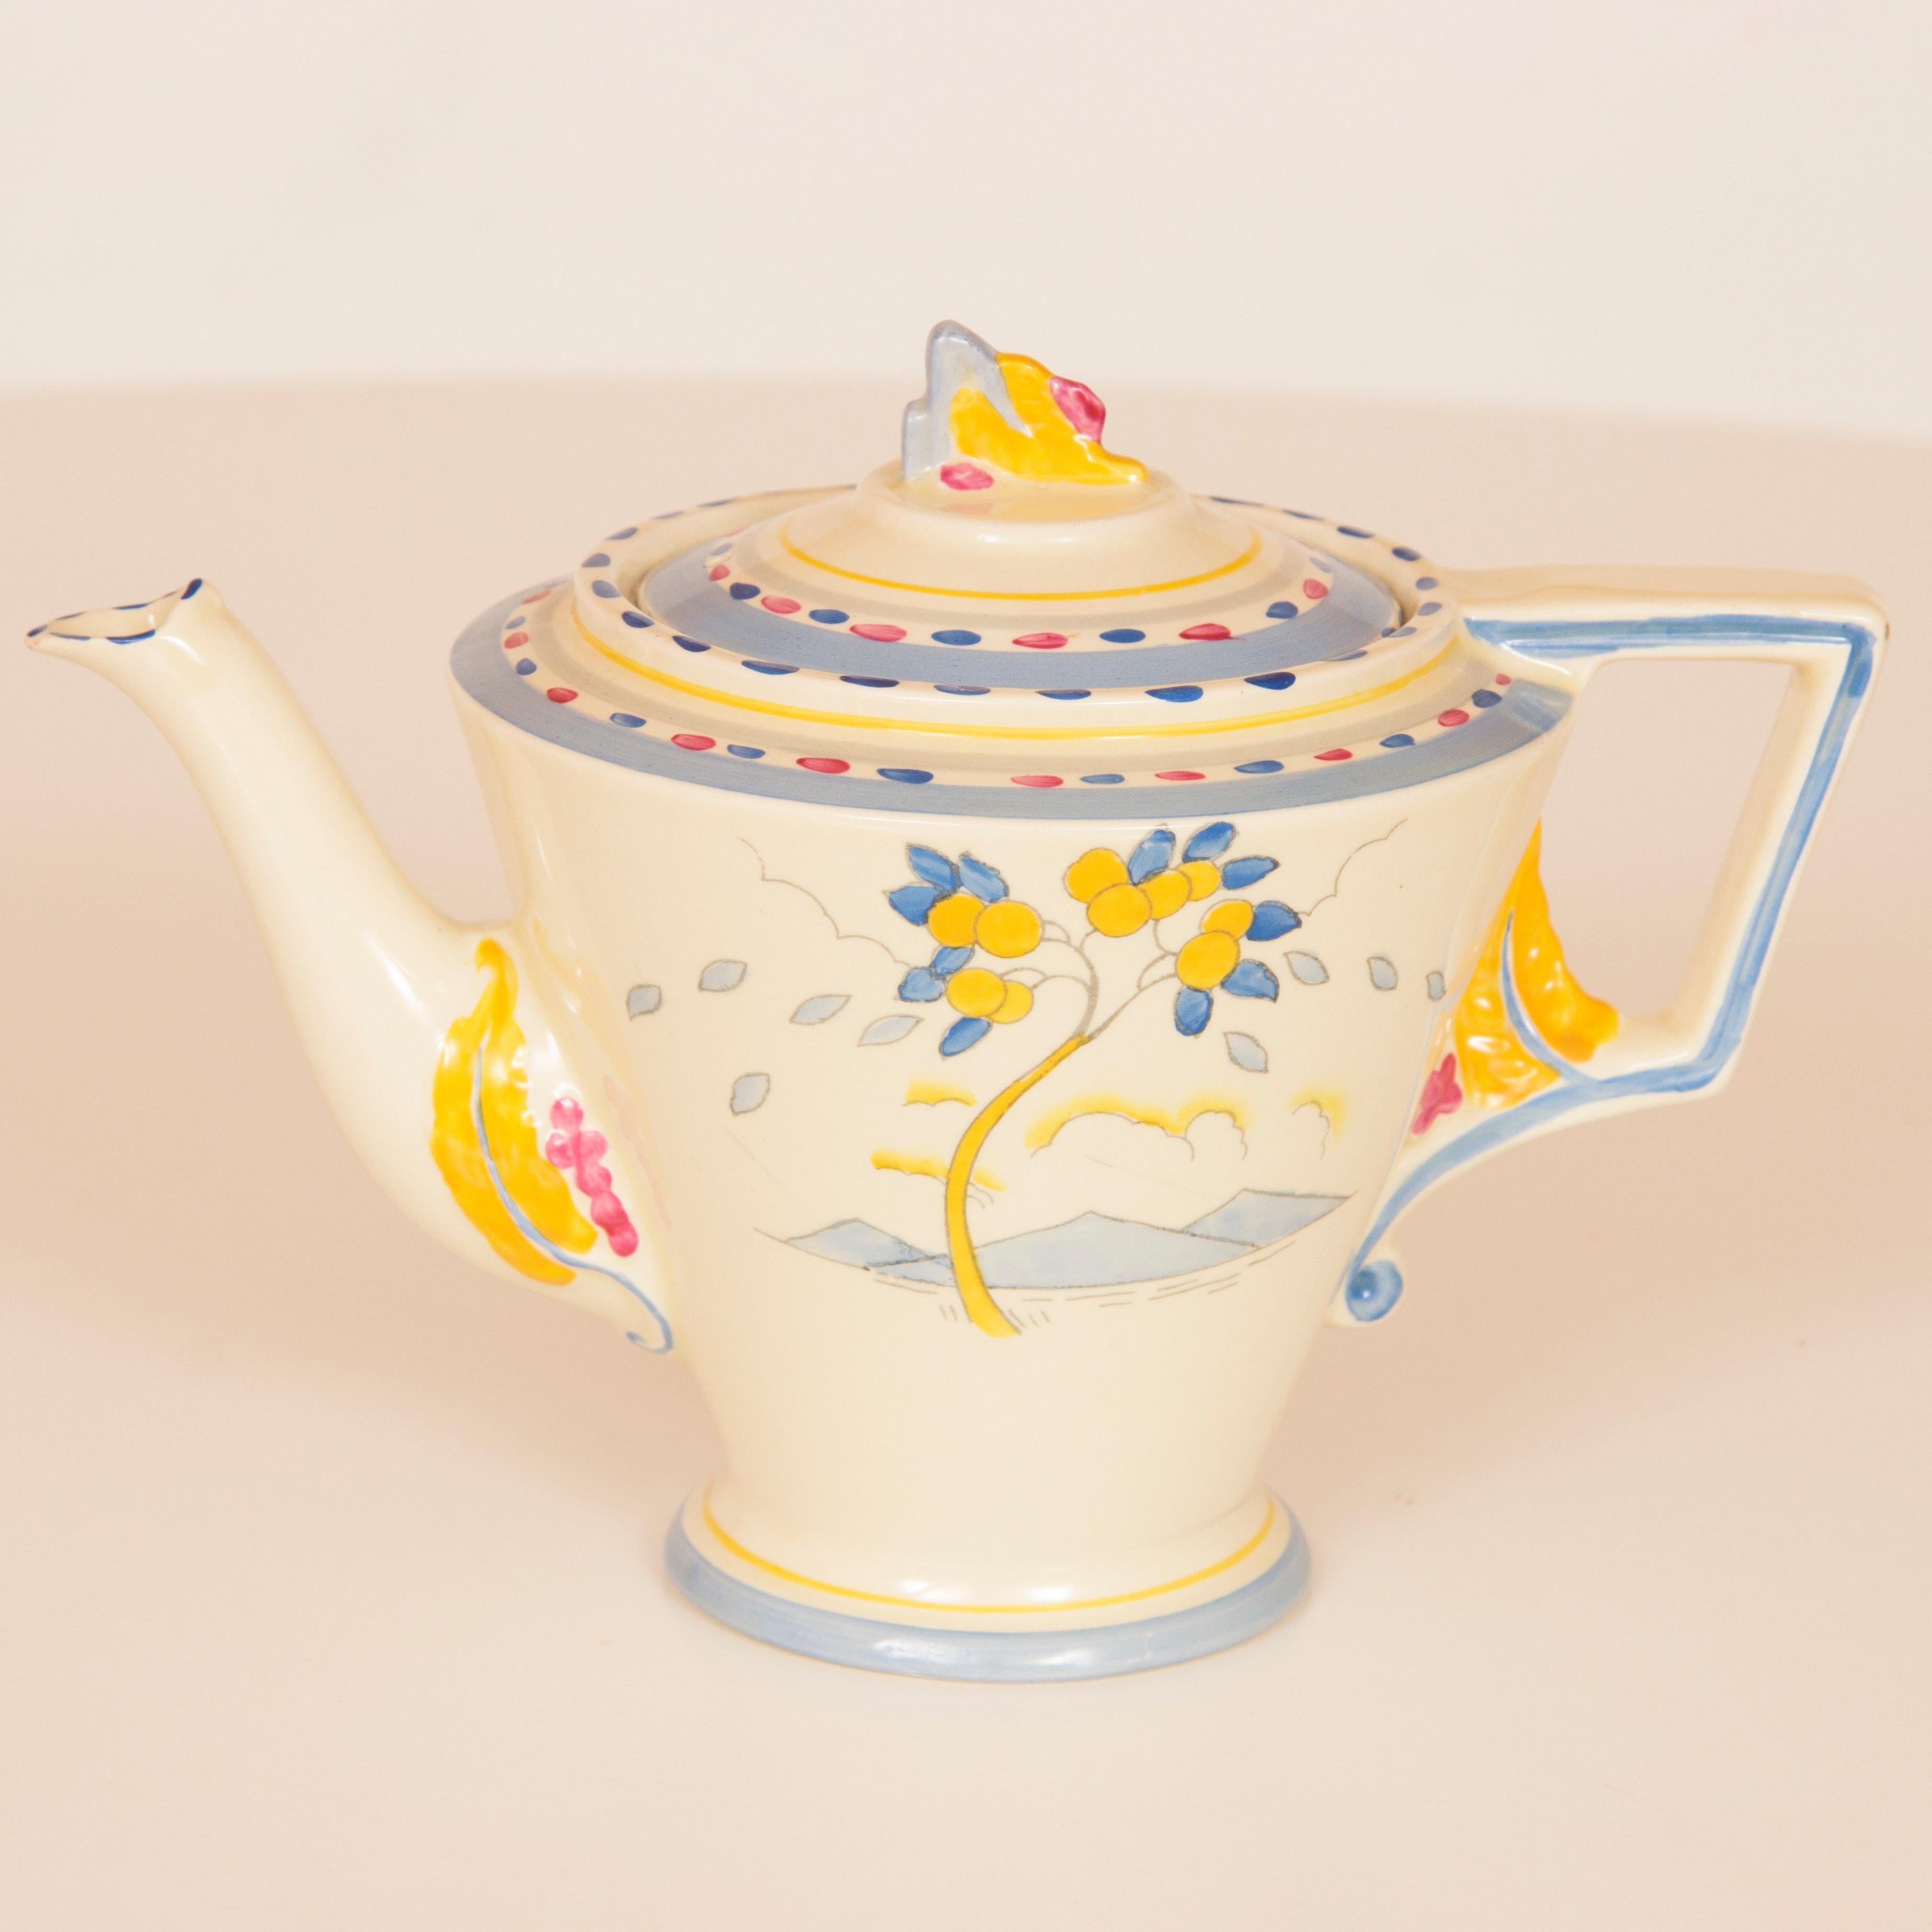 Art Deco hand-painted tea and dinner service.
A rare set in the lemon tree design by Burleigh ware on the Art Deco Zenith shape,, complete service for 12 place setting, with two large and two small tureens and 5 platters, soup ladle and two under